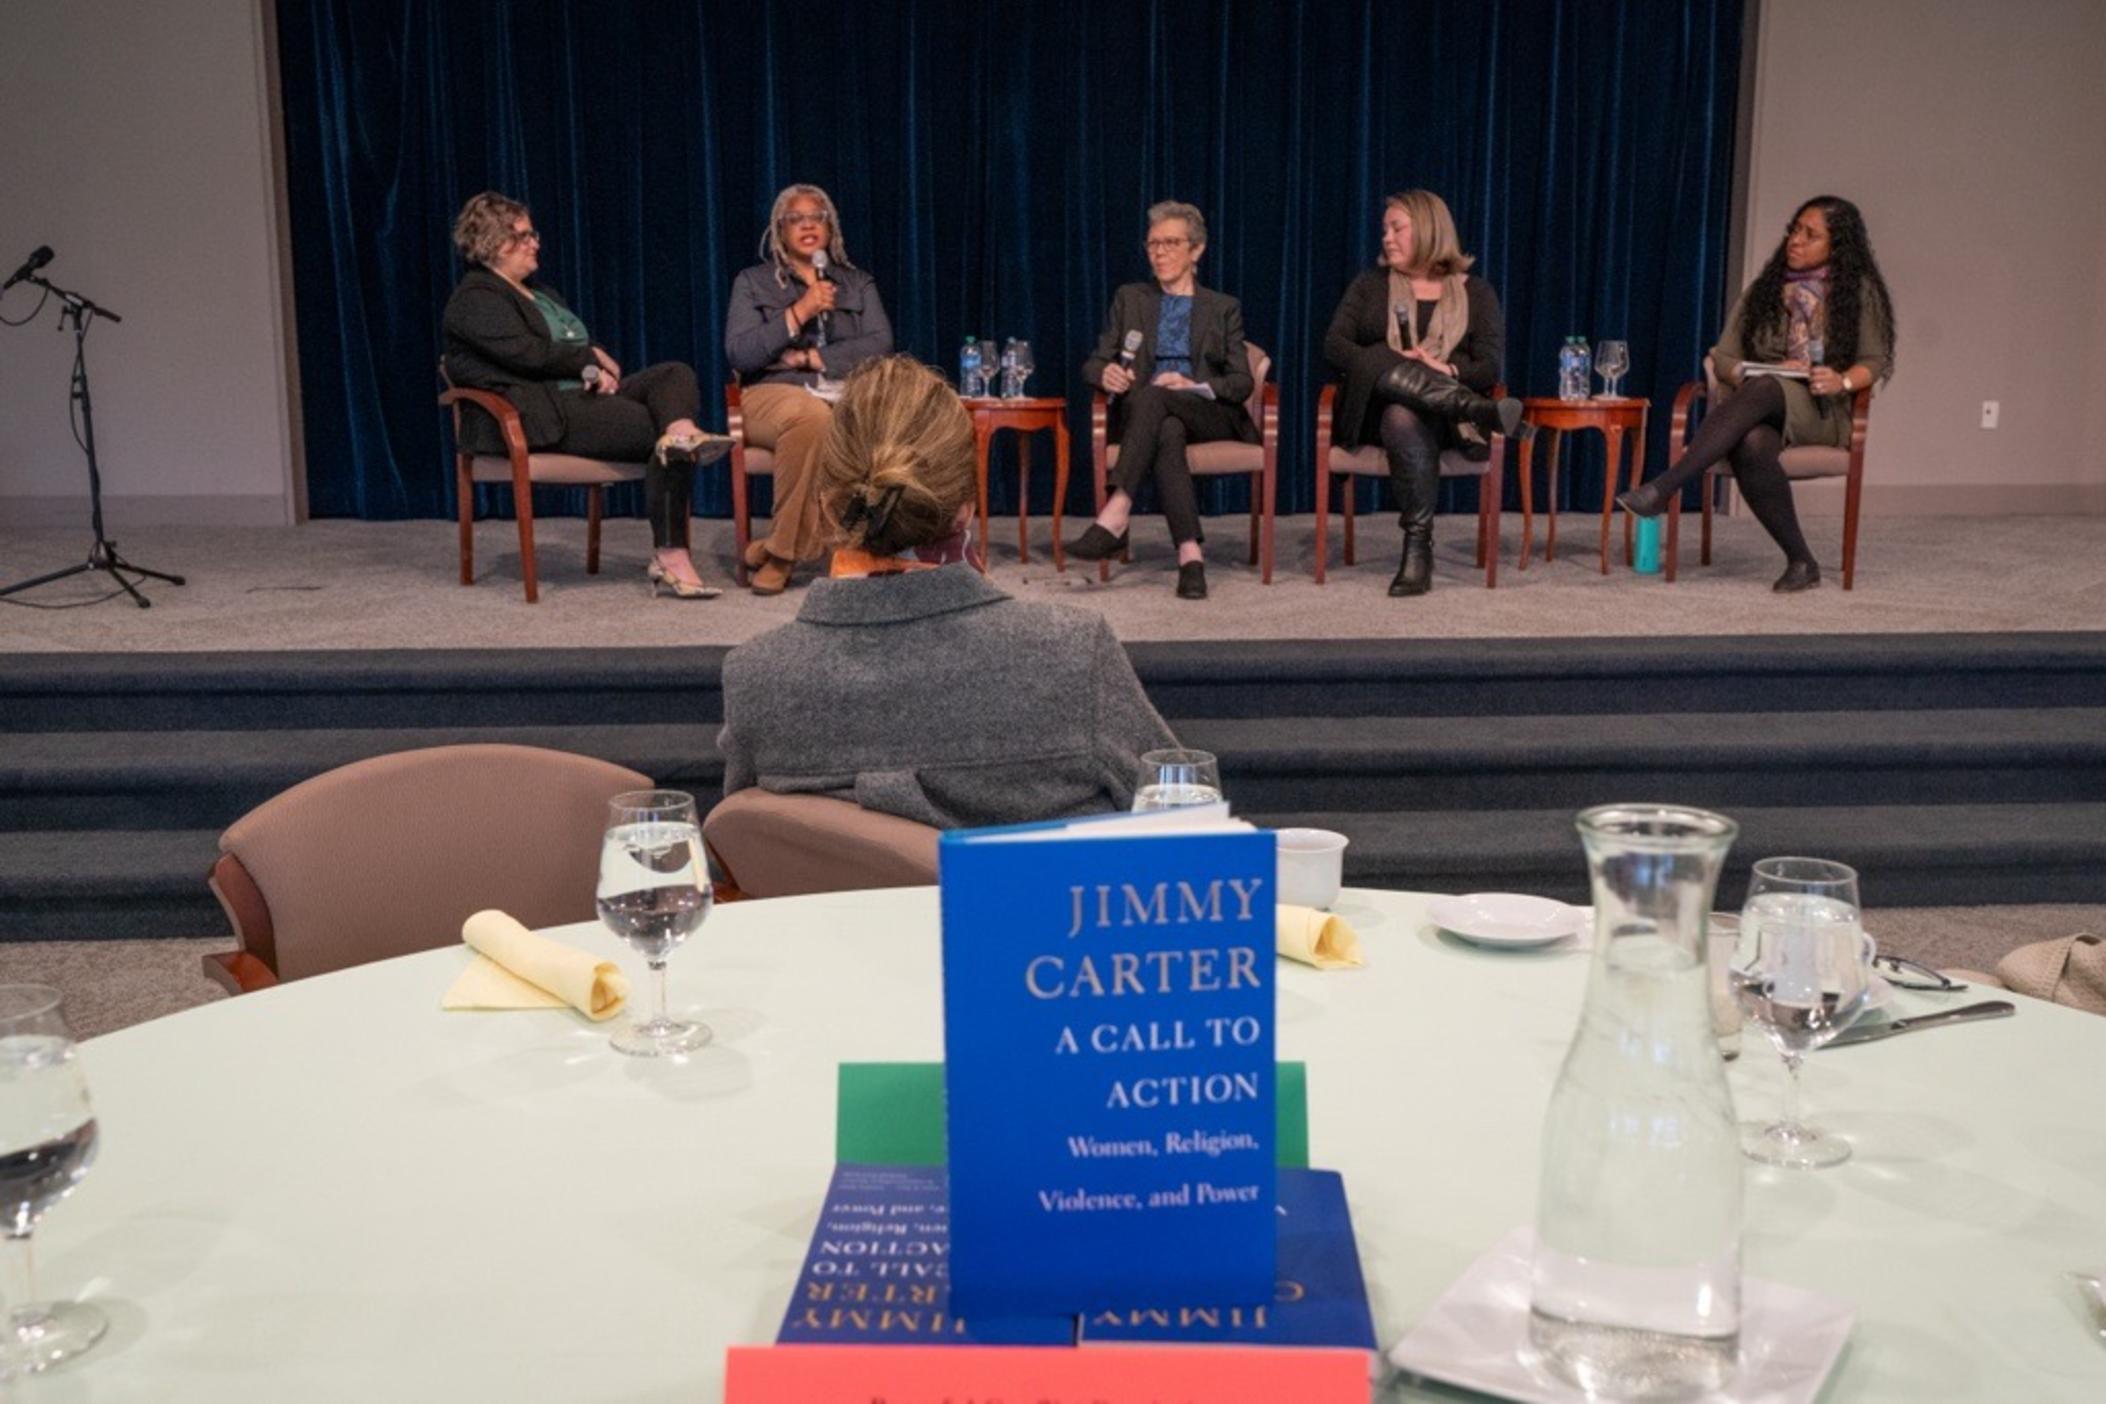 'A Call to Action': Jimmy Carter's 2014 book about women's rights was presented to guests at an International Women's Day event at the Carter Center March 11 celebrating the book's 10th anniversary and women's history month. Event attendees participated in a discussion about actions toward security and equality. Panelists (from left) included some of Jimmy Carter's close advisors (from left): Beth Davis, Meredith Evans, Ph.D., Judy Langford Carter, Lauren Gay and moderator Aklima Khondoker.